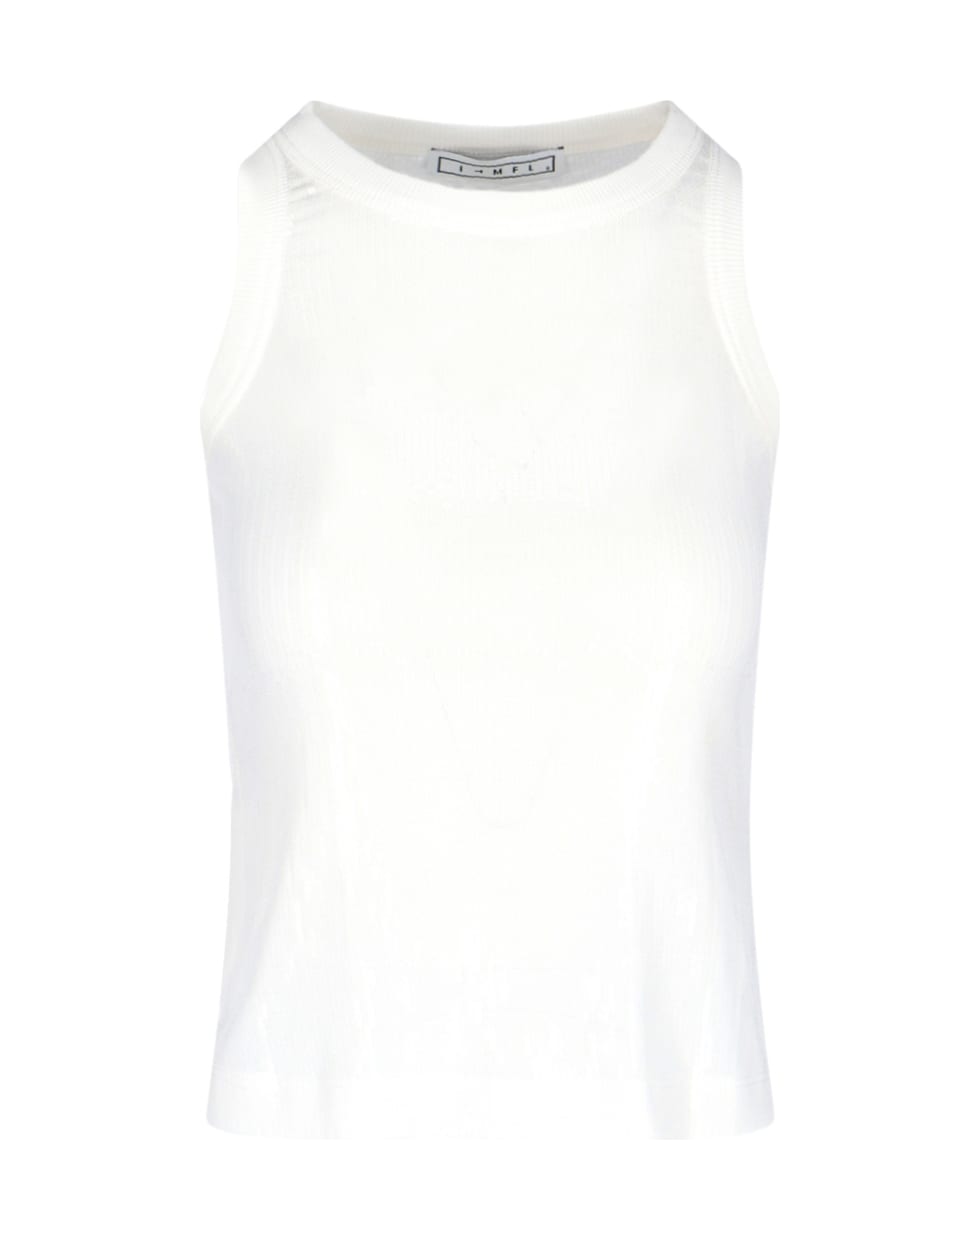 In The Mood For Love Top - White